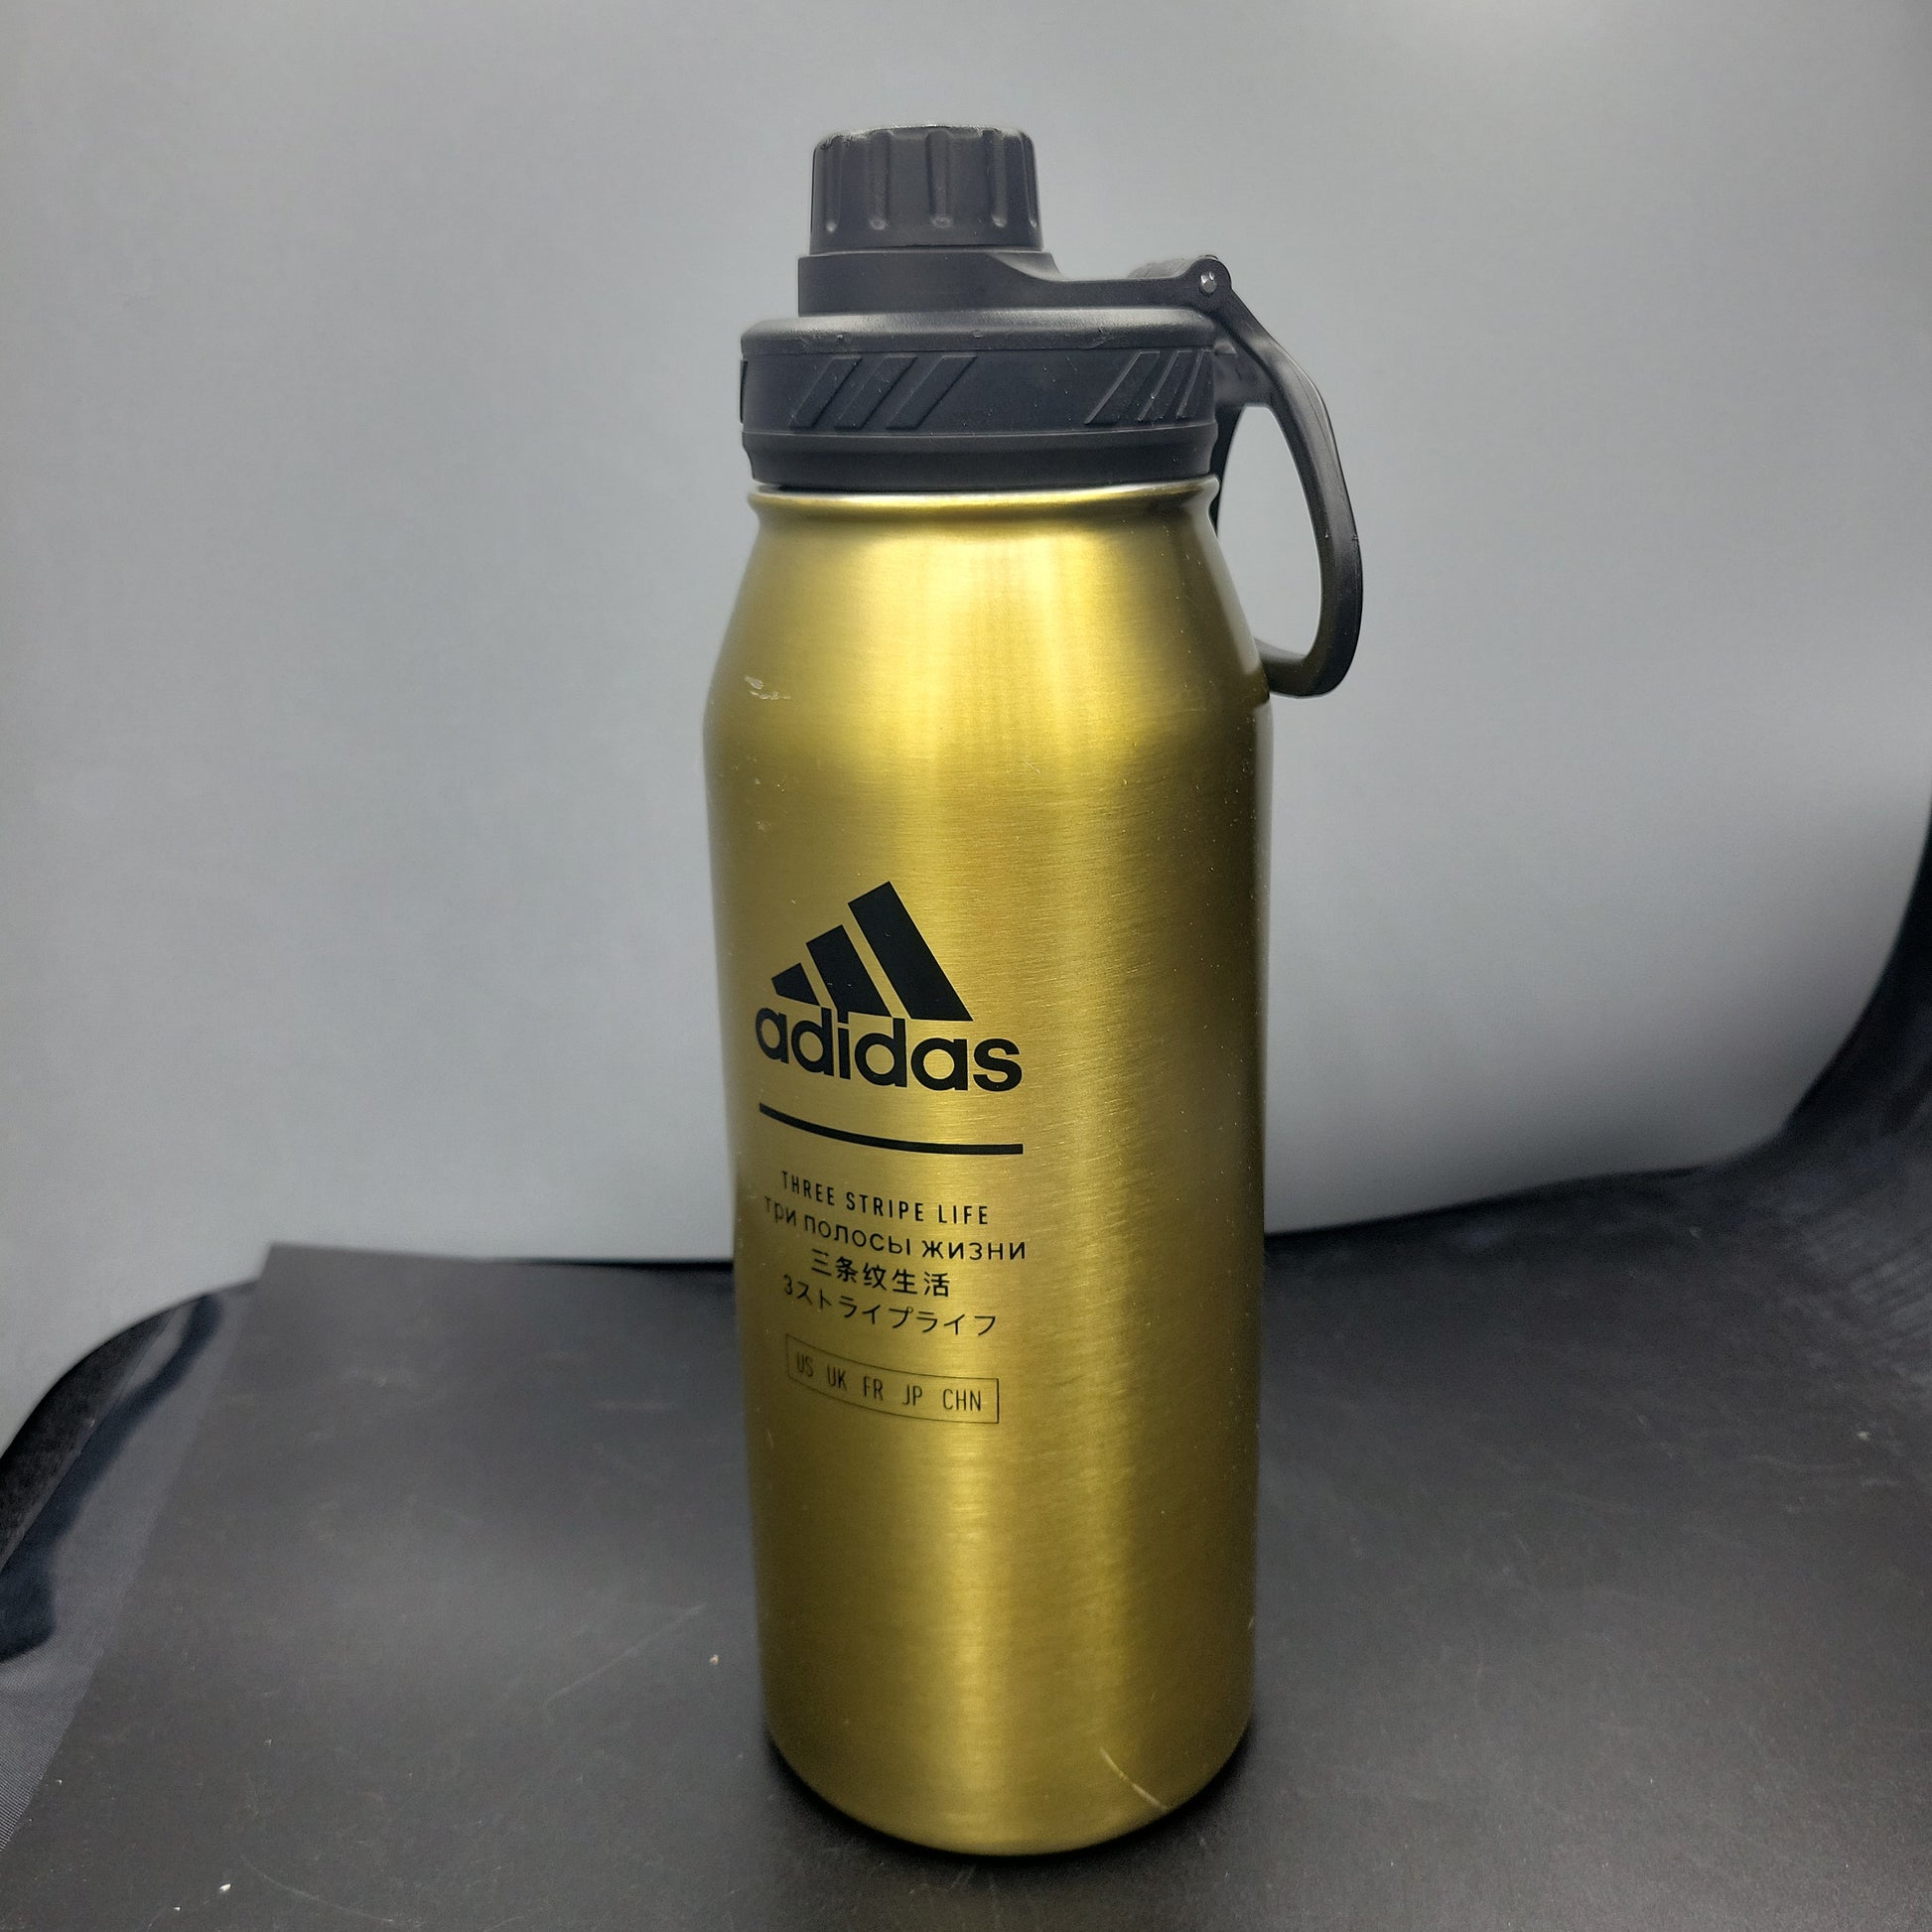 Adidas Stainless Steel 1 Liter (32 oz) Water Bottle Hot/Cold Double Wall  NEW